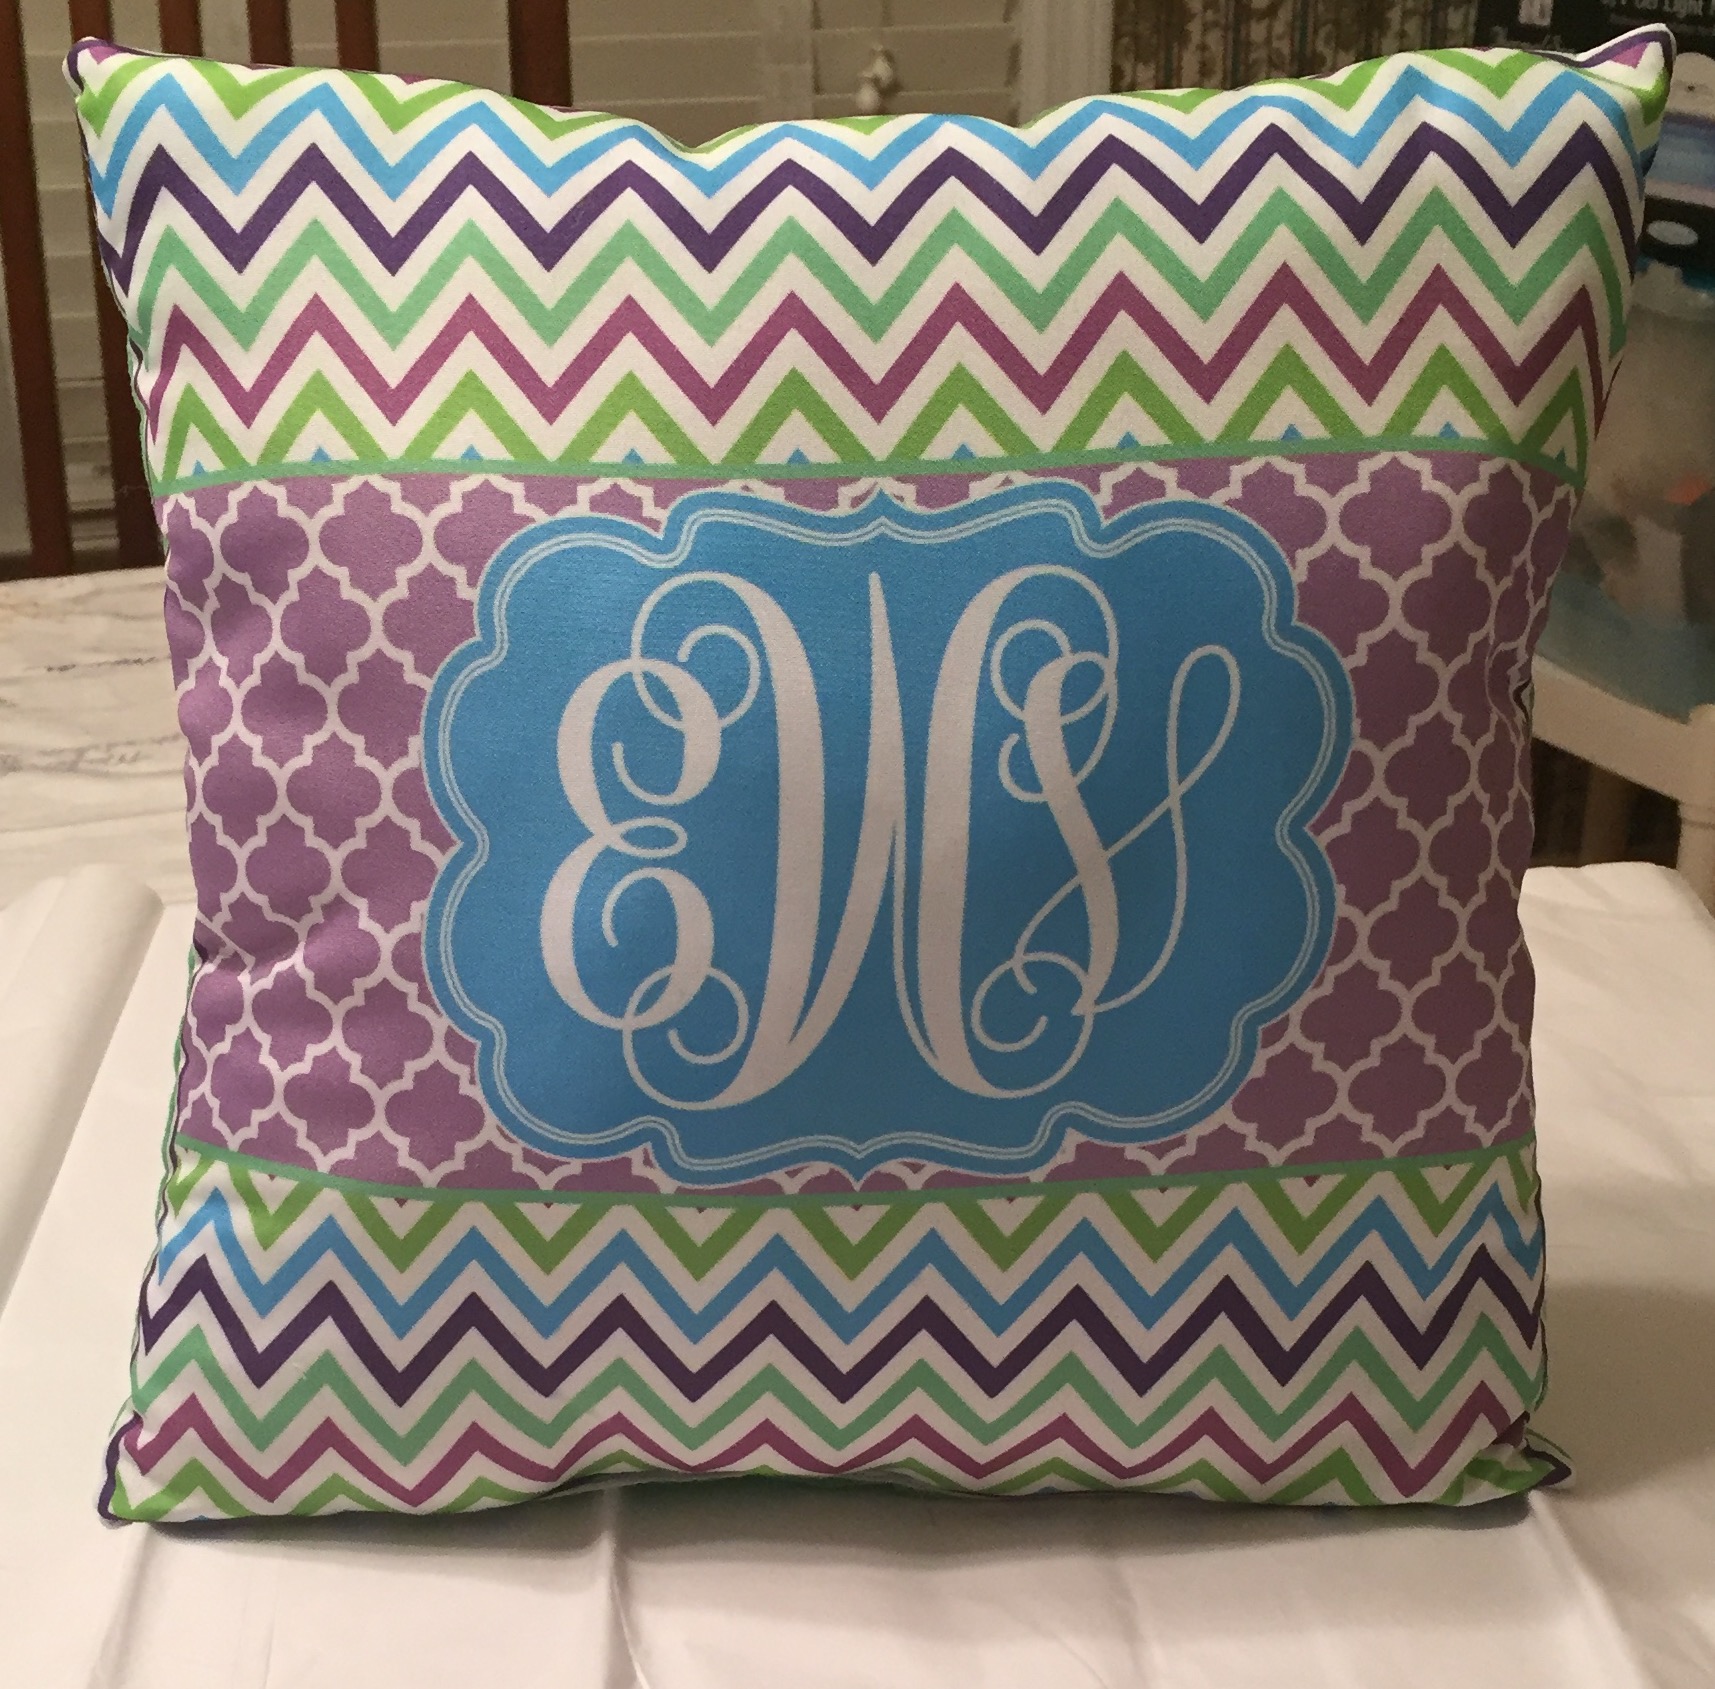 Monogram Pillow made with sublimation printing